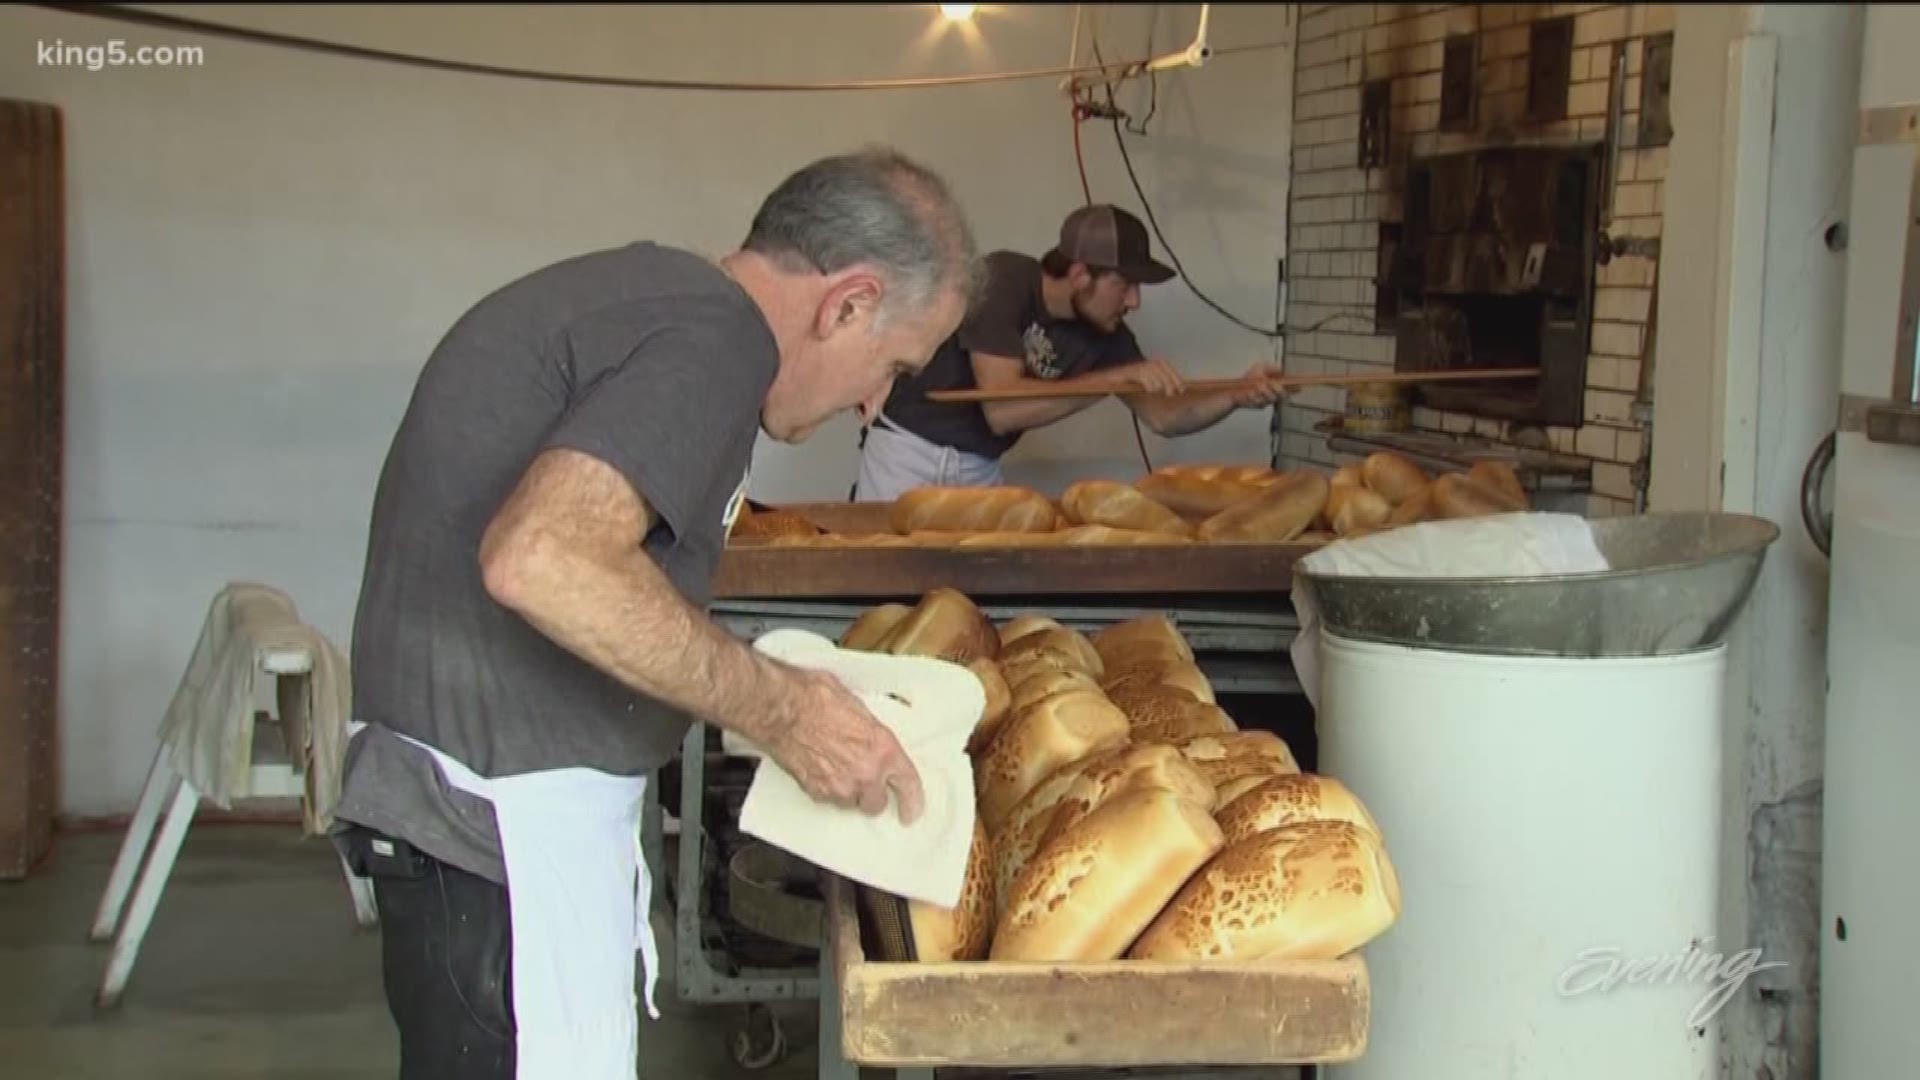 The bread is always fresh, but it's been baking for more than a century.